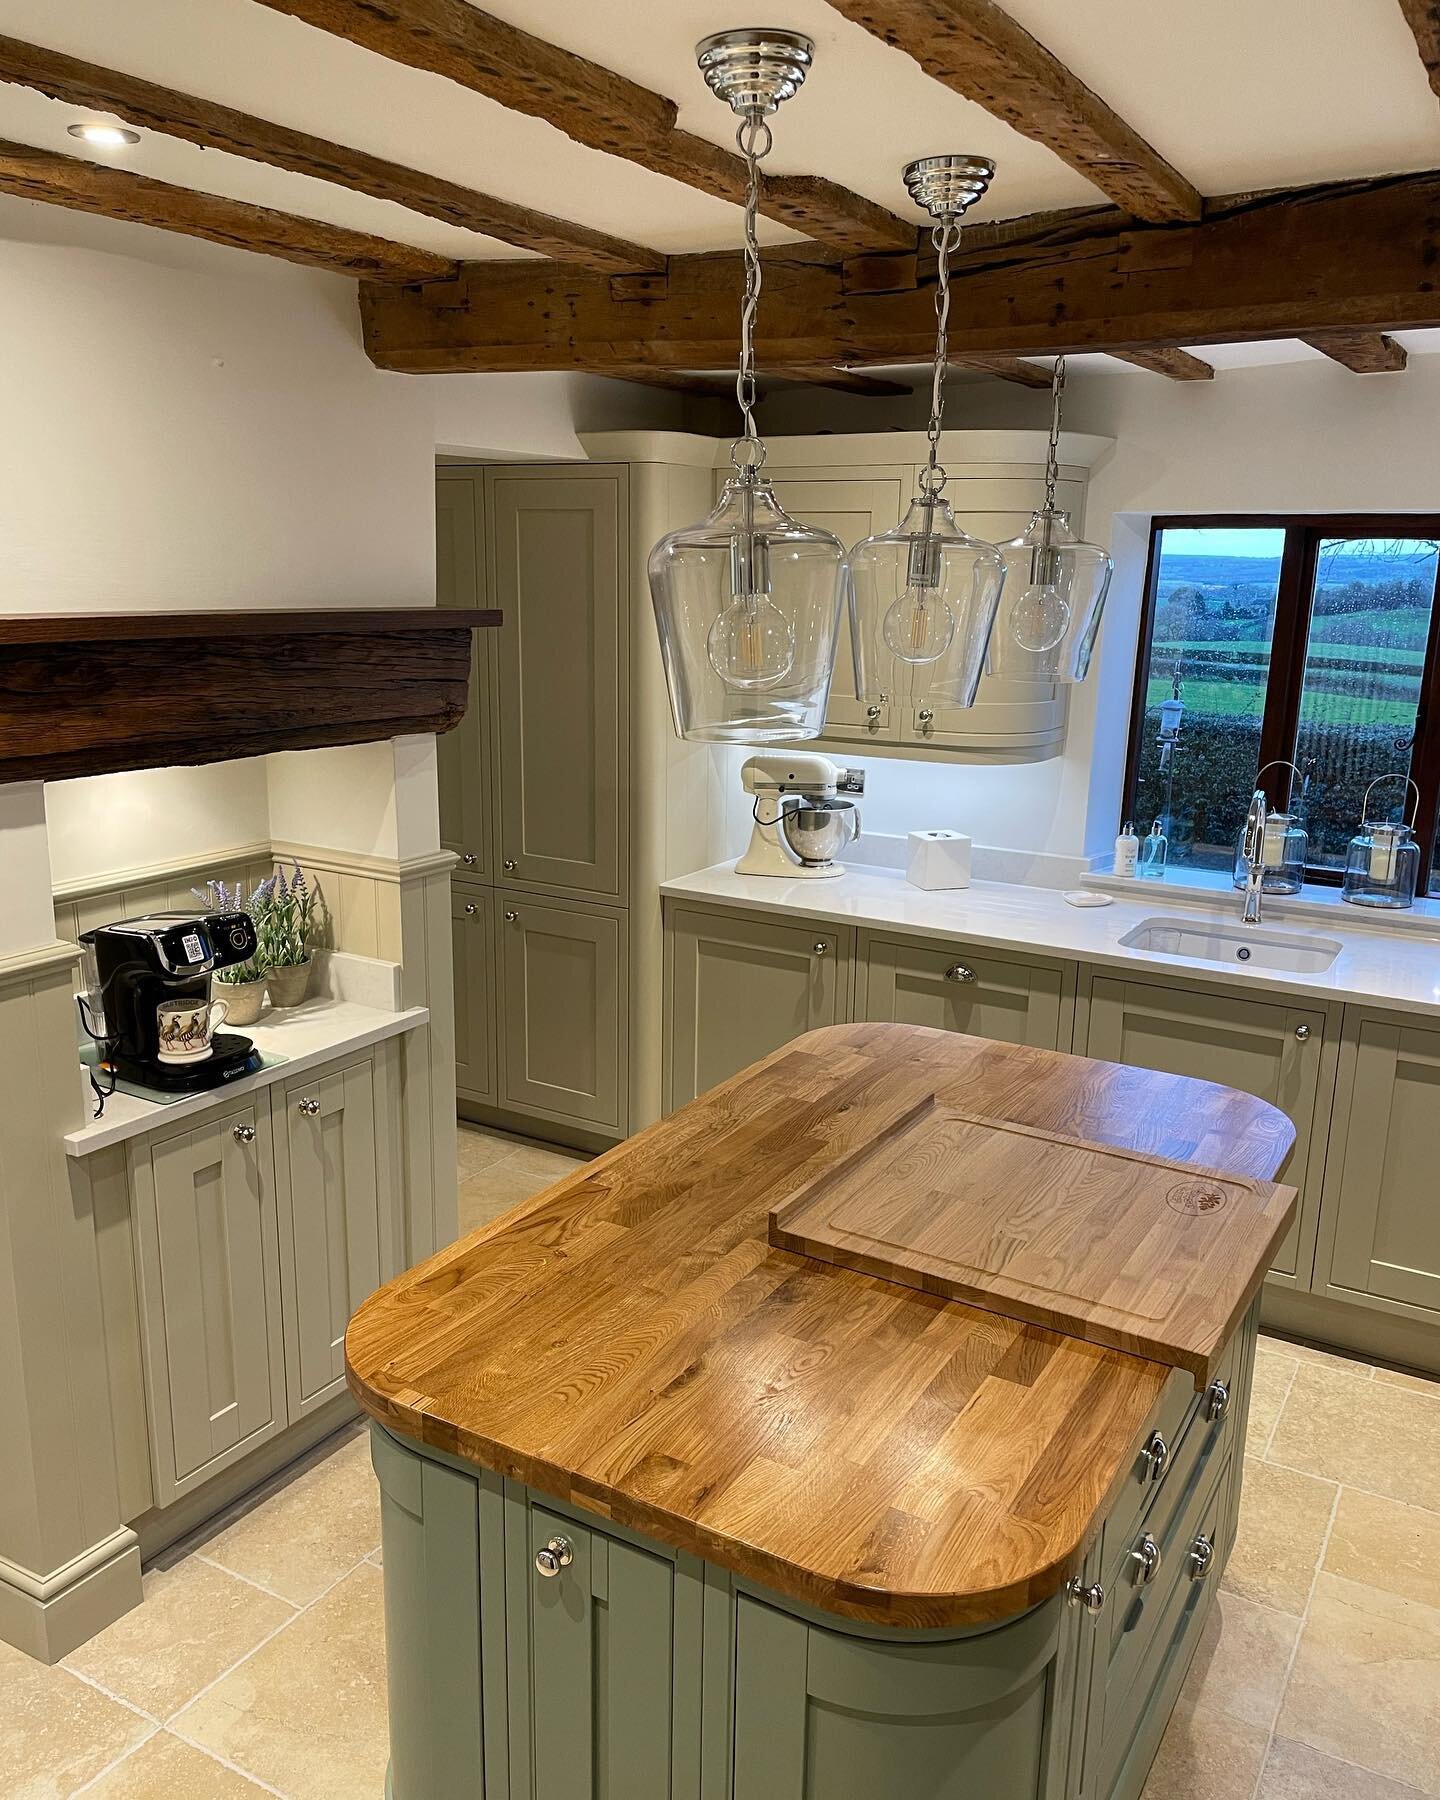 Our final kitchen installation of 2022 is now complete! 
This is the stunning Helmsley range from @lauraashleyfittedfurniture and is finished here in Sage with an Atlantic Green island. 
Complete with a Nickel tap from @quookeruk, floor tiles from @c